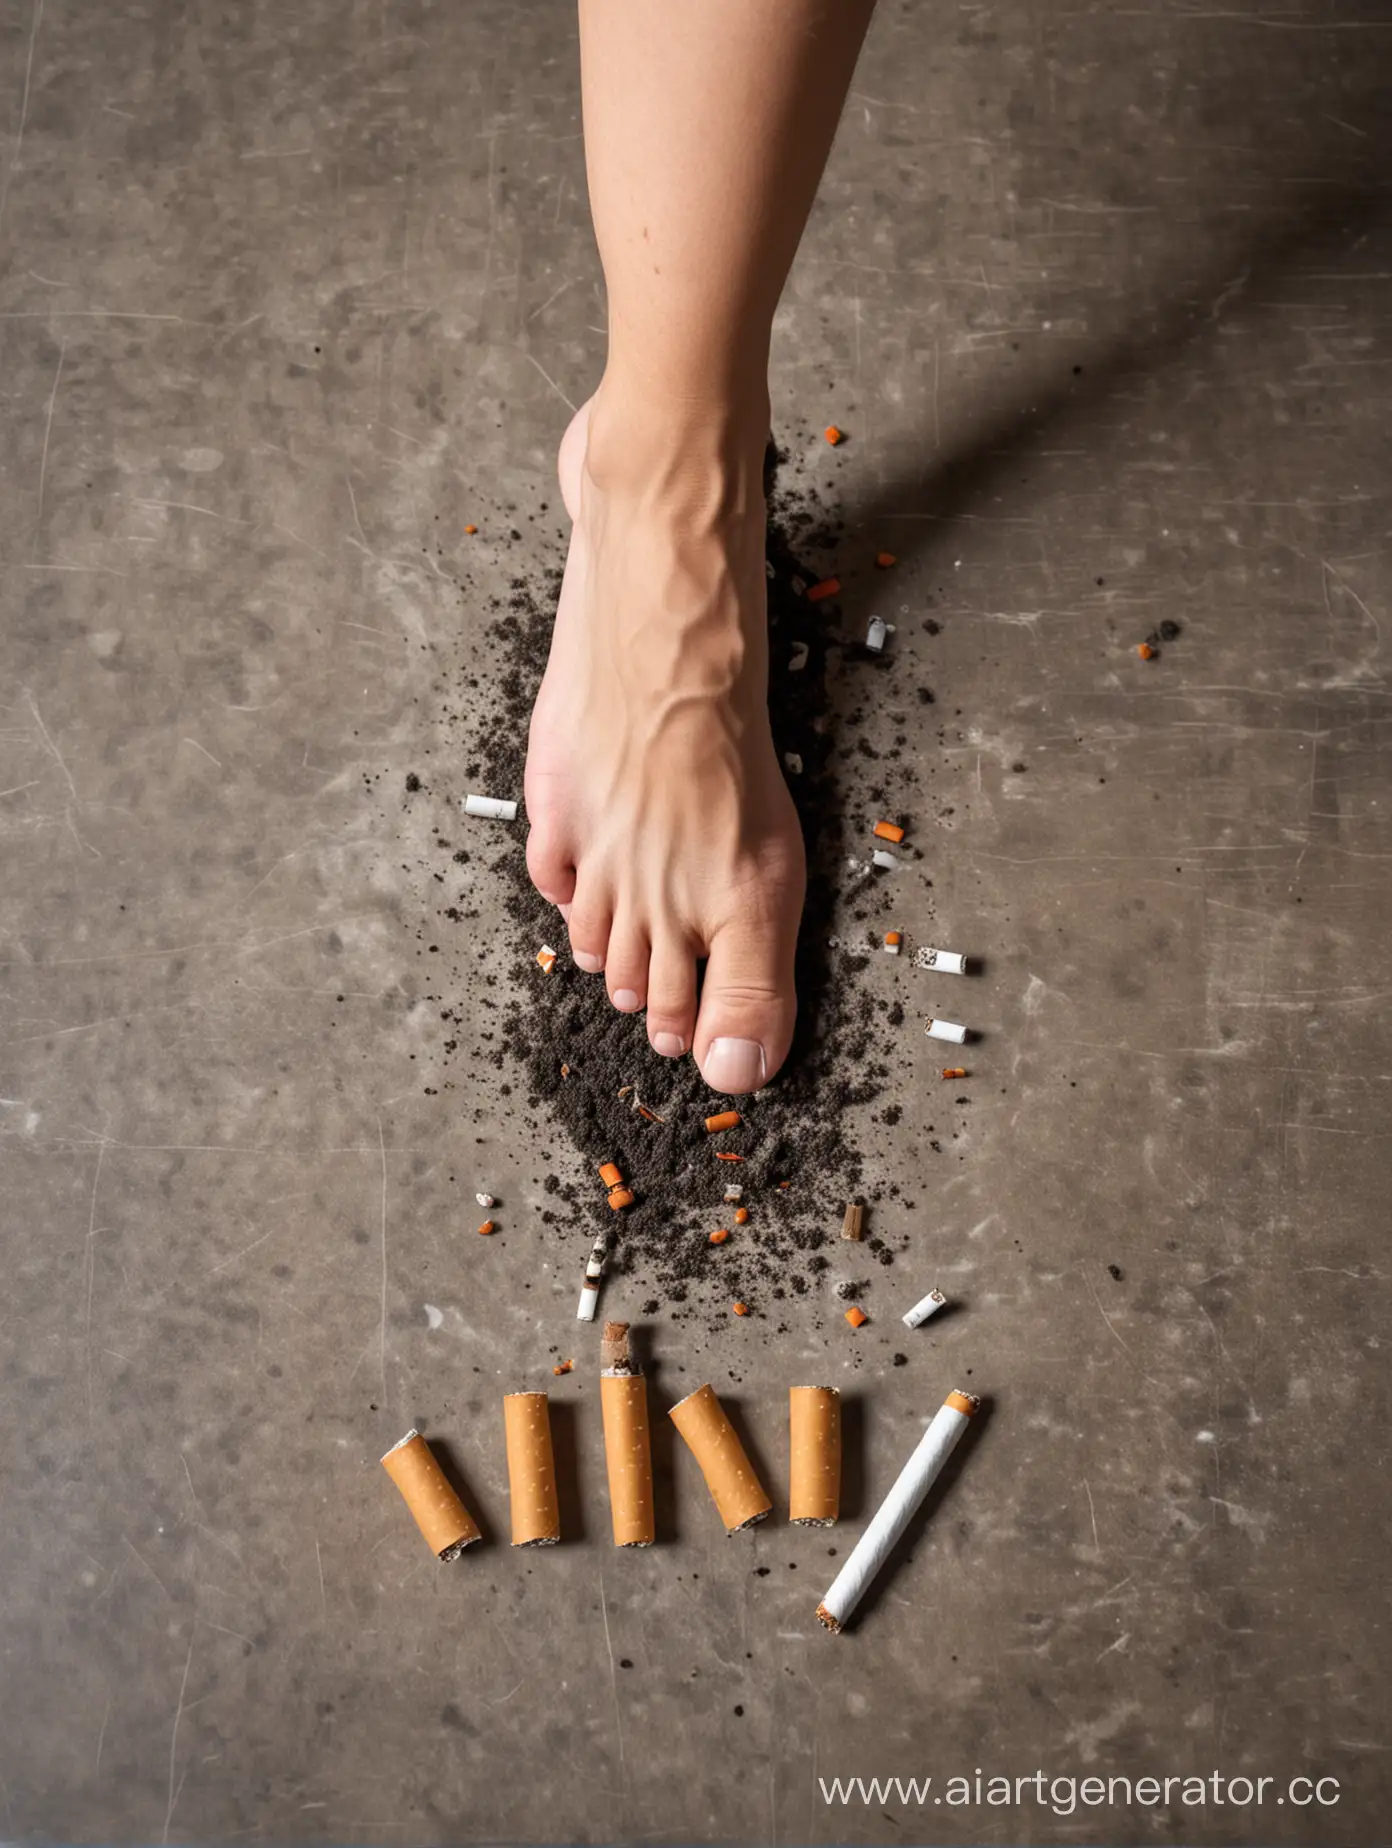 A human foot tramples on cigarettes